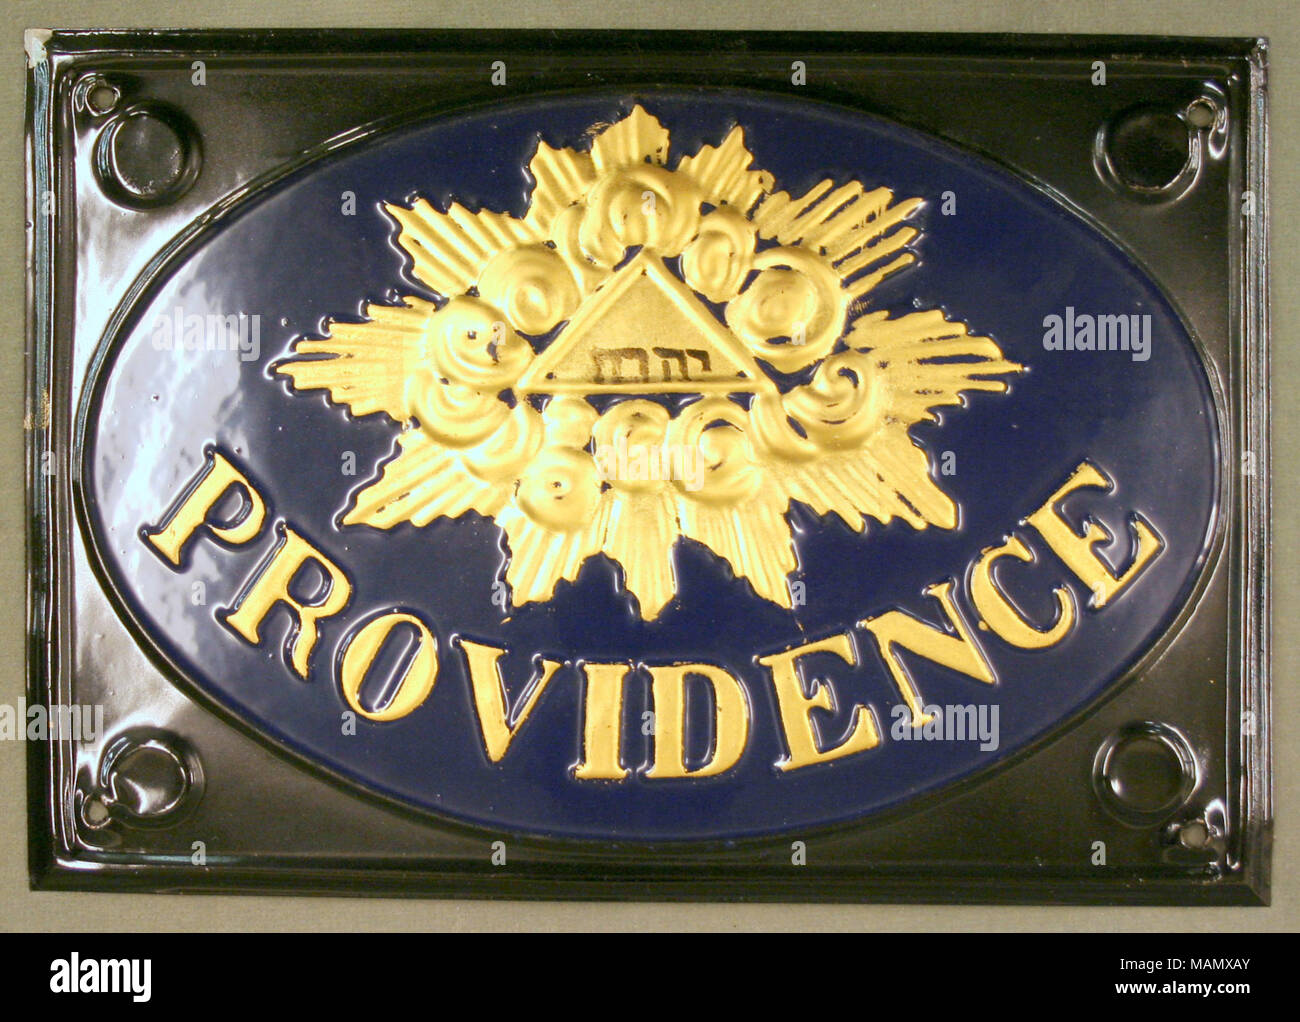 Pressed tin fire mark for La Providence Compagnie d'Assurances Contre l'Incendie in Paris, France showing raised gold emblem on dark blue oval and black background Title: Fire mark for La Providence Compagnie d'Assurances Contre l'Incendie in Paris, France  . after 1838. Stock Photo